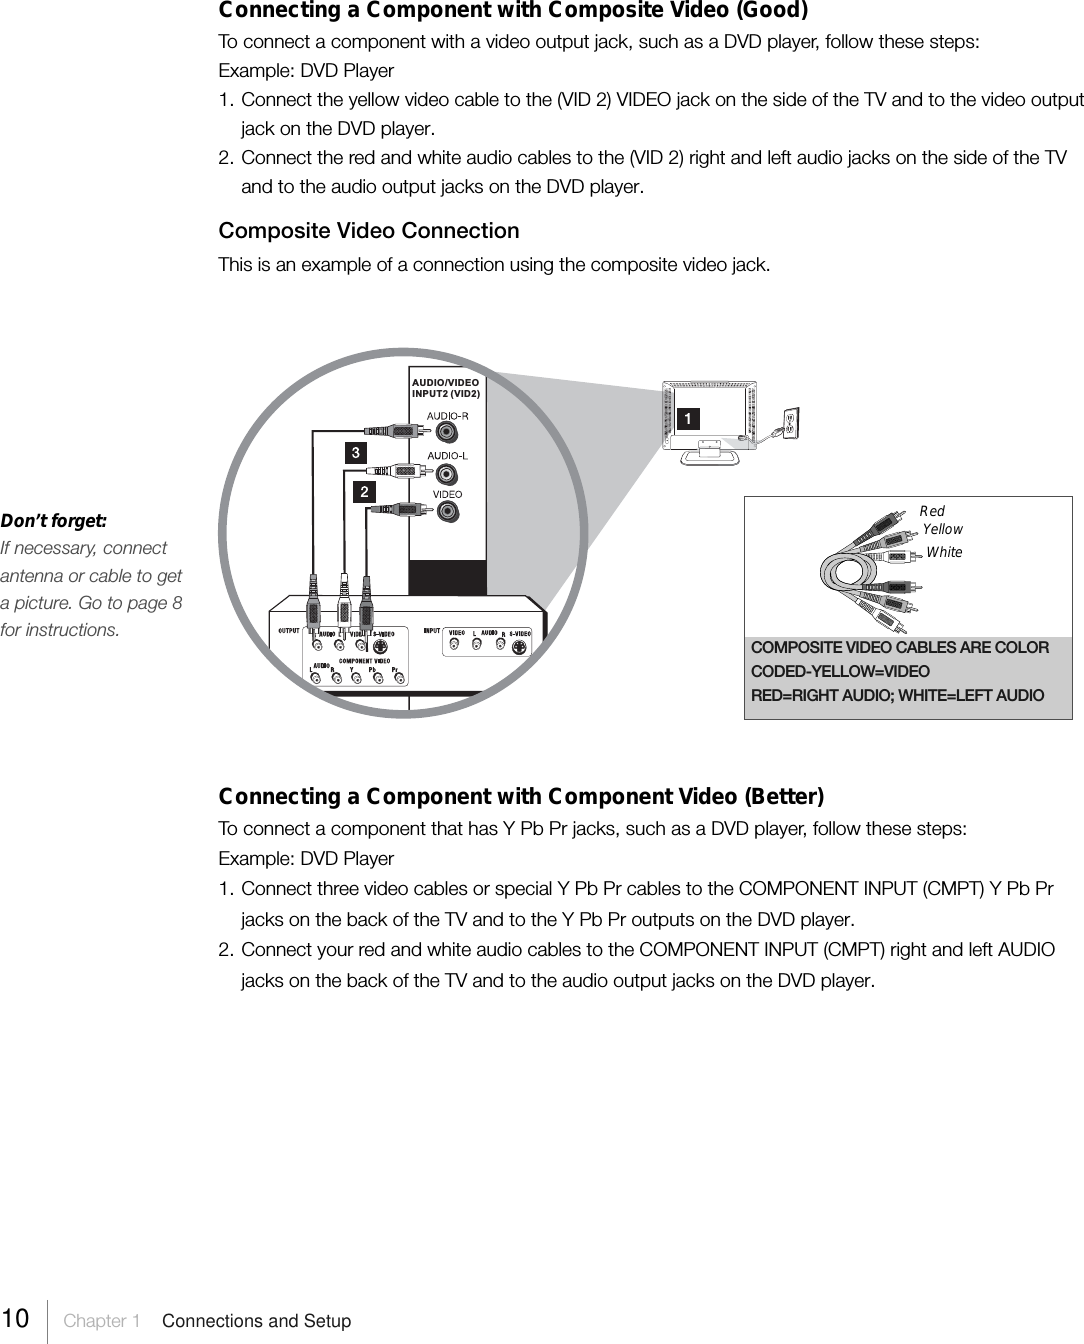 Don’t forget:If necessary, connectantenna or cable to geta picture. Go to page 8for instructions.Connecting a Component with Composite Video (Good)To connect a component with a video output jack, such as a DVD player, follow these steps:Example: DVD Player1. Connect the yellow video cable to the (VID 2) VIDEO jack on the side of the TV and to the video outputjack on the DVD player.2. Connect the red and white audio cables to the (VID 2) right and left audio jacks on the side of the TVand to the audio output jacks on the DVD player.Composite Video ConnectionThis is an example of a connection using the composite video jack.Connecting a Component with Component Video (Better)To connect a component that has Y Pb Pr jacks, such as a DVD player, follow these steps:Example: DVD Player1. Connect three video cables or special Y Pb Pr cables to the COMPONENT INPUT (CMPT) Y Pb Prjacks on the back of the TV and to the Y Pb Pr outputs on the DVD player.2. Connect your red and white audio cables to the COMPONENT INPUT (CMPT) right and left AUDIOjacks on the back of the TV and to the audio output jacks on the DVD player.AUDIO/VIDEOINPUT2 (VID2)10 Chapter 1  Connections and SetupCOMPOSITE VIDEO CABLES ARE COLORCODED-YELLOW=VIDEORED=RIGHT AUDIO; WHITE=LEFT AUDIORedYellowWhite